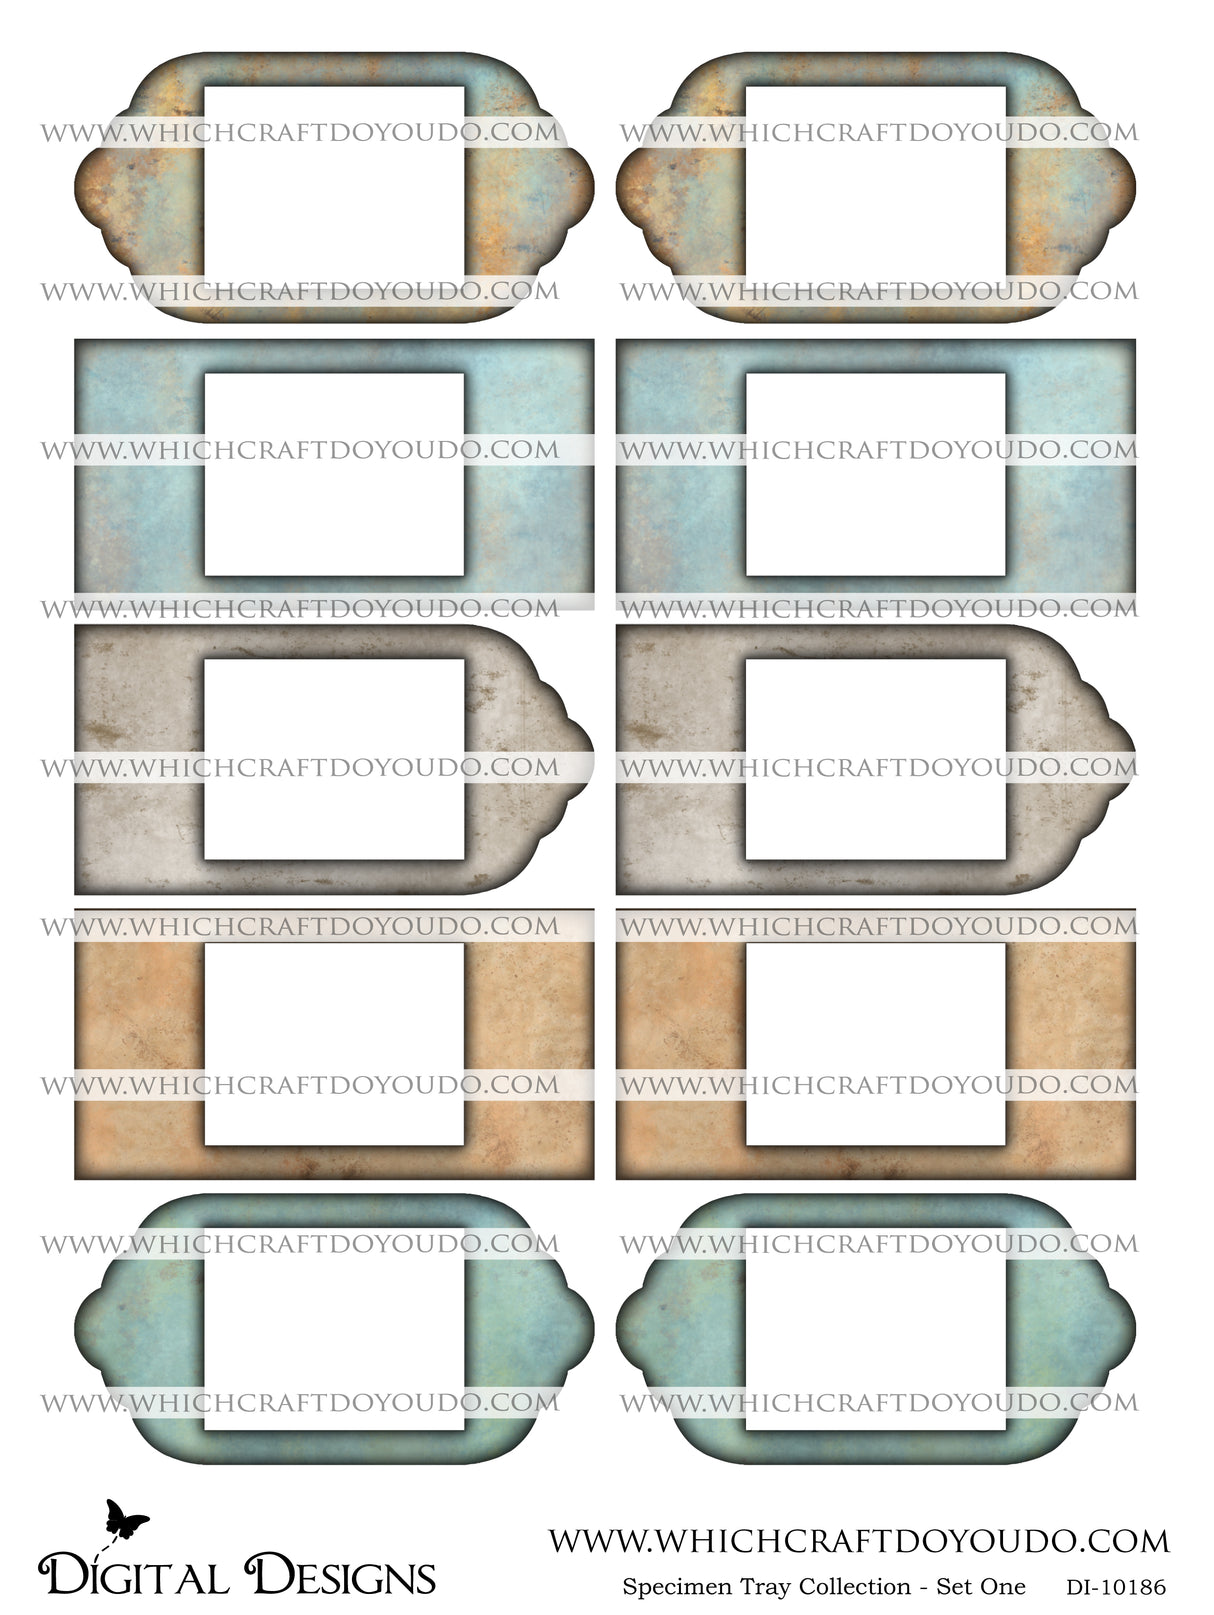 Specimen Tray Collection - Set One - DI-10186 - Digital Download